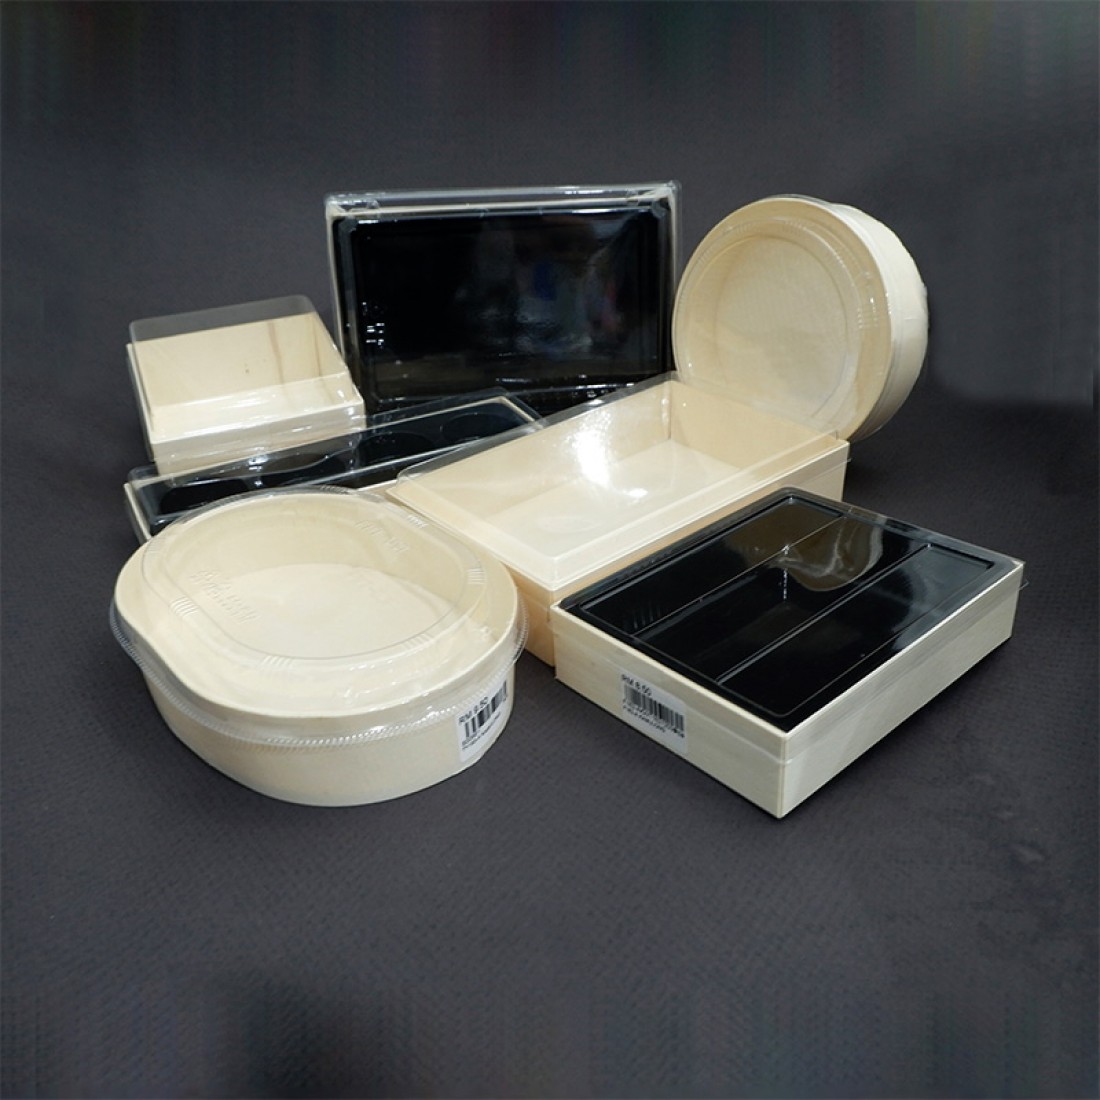 F230-A KAMULONG WOODEN TRAY & LID COVER 